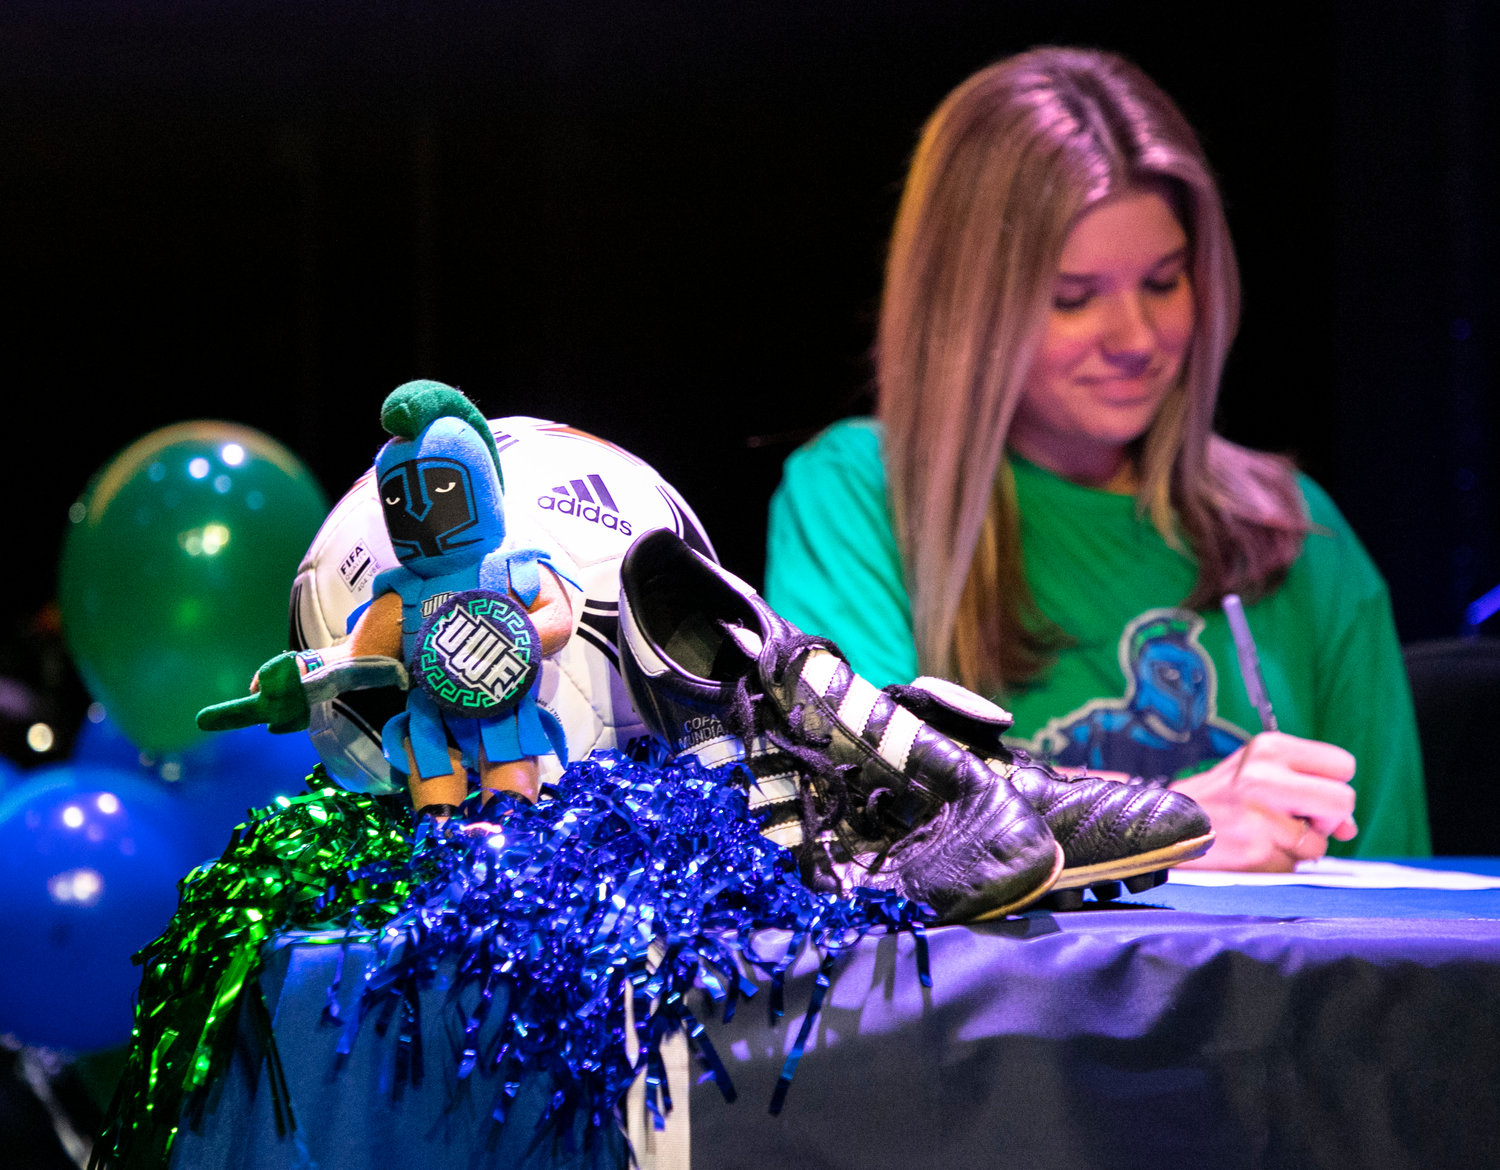 Addison Smith checks her signature on her National Letter of Intent during the Nov. 10 signing ceremony at 3Circle Church in Fairhope. Although Smith tore her ACL a little over a month after committing to the West Florida soccer program, the coaches had no doubt she’d return even stronger.